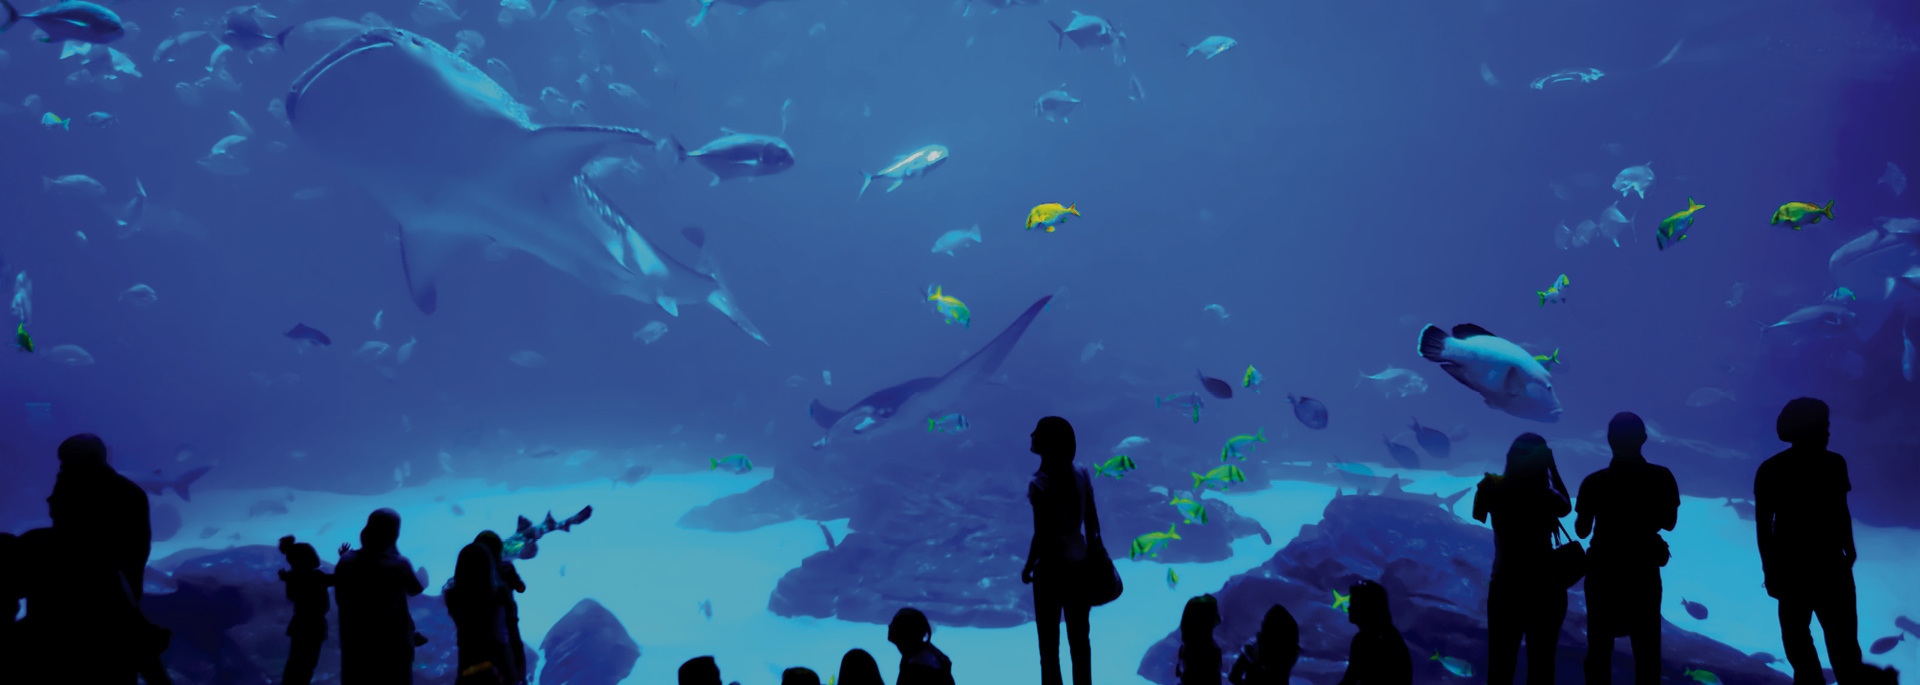 silhouettes of people standing in front of large aquarium tank